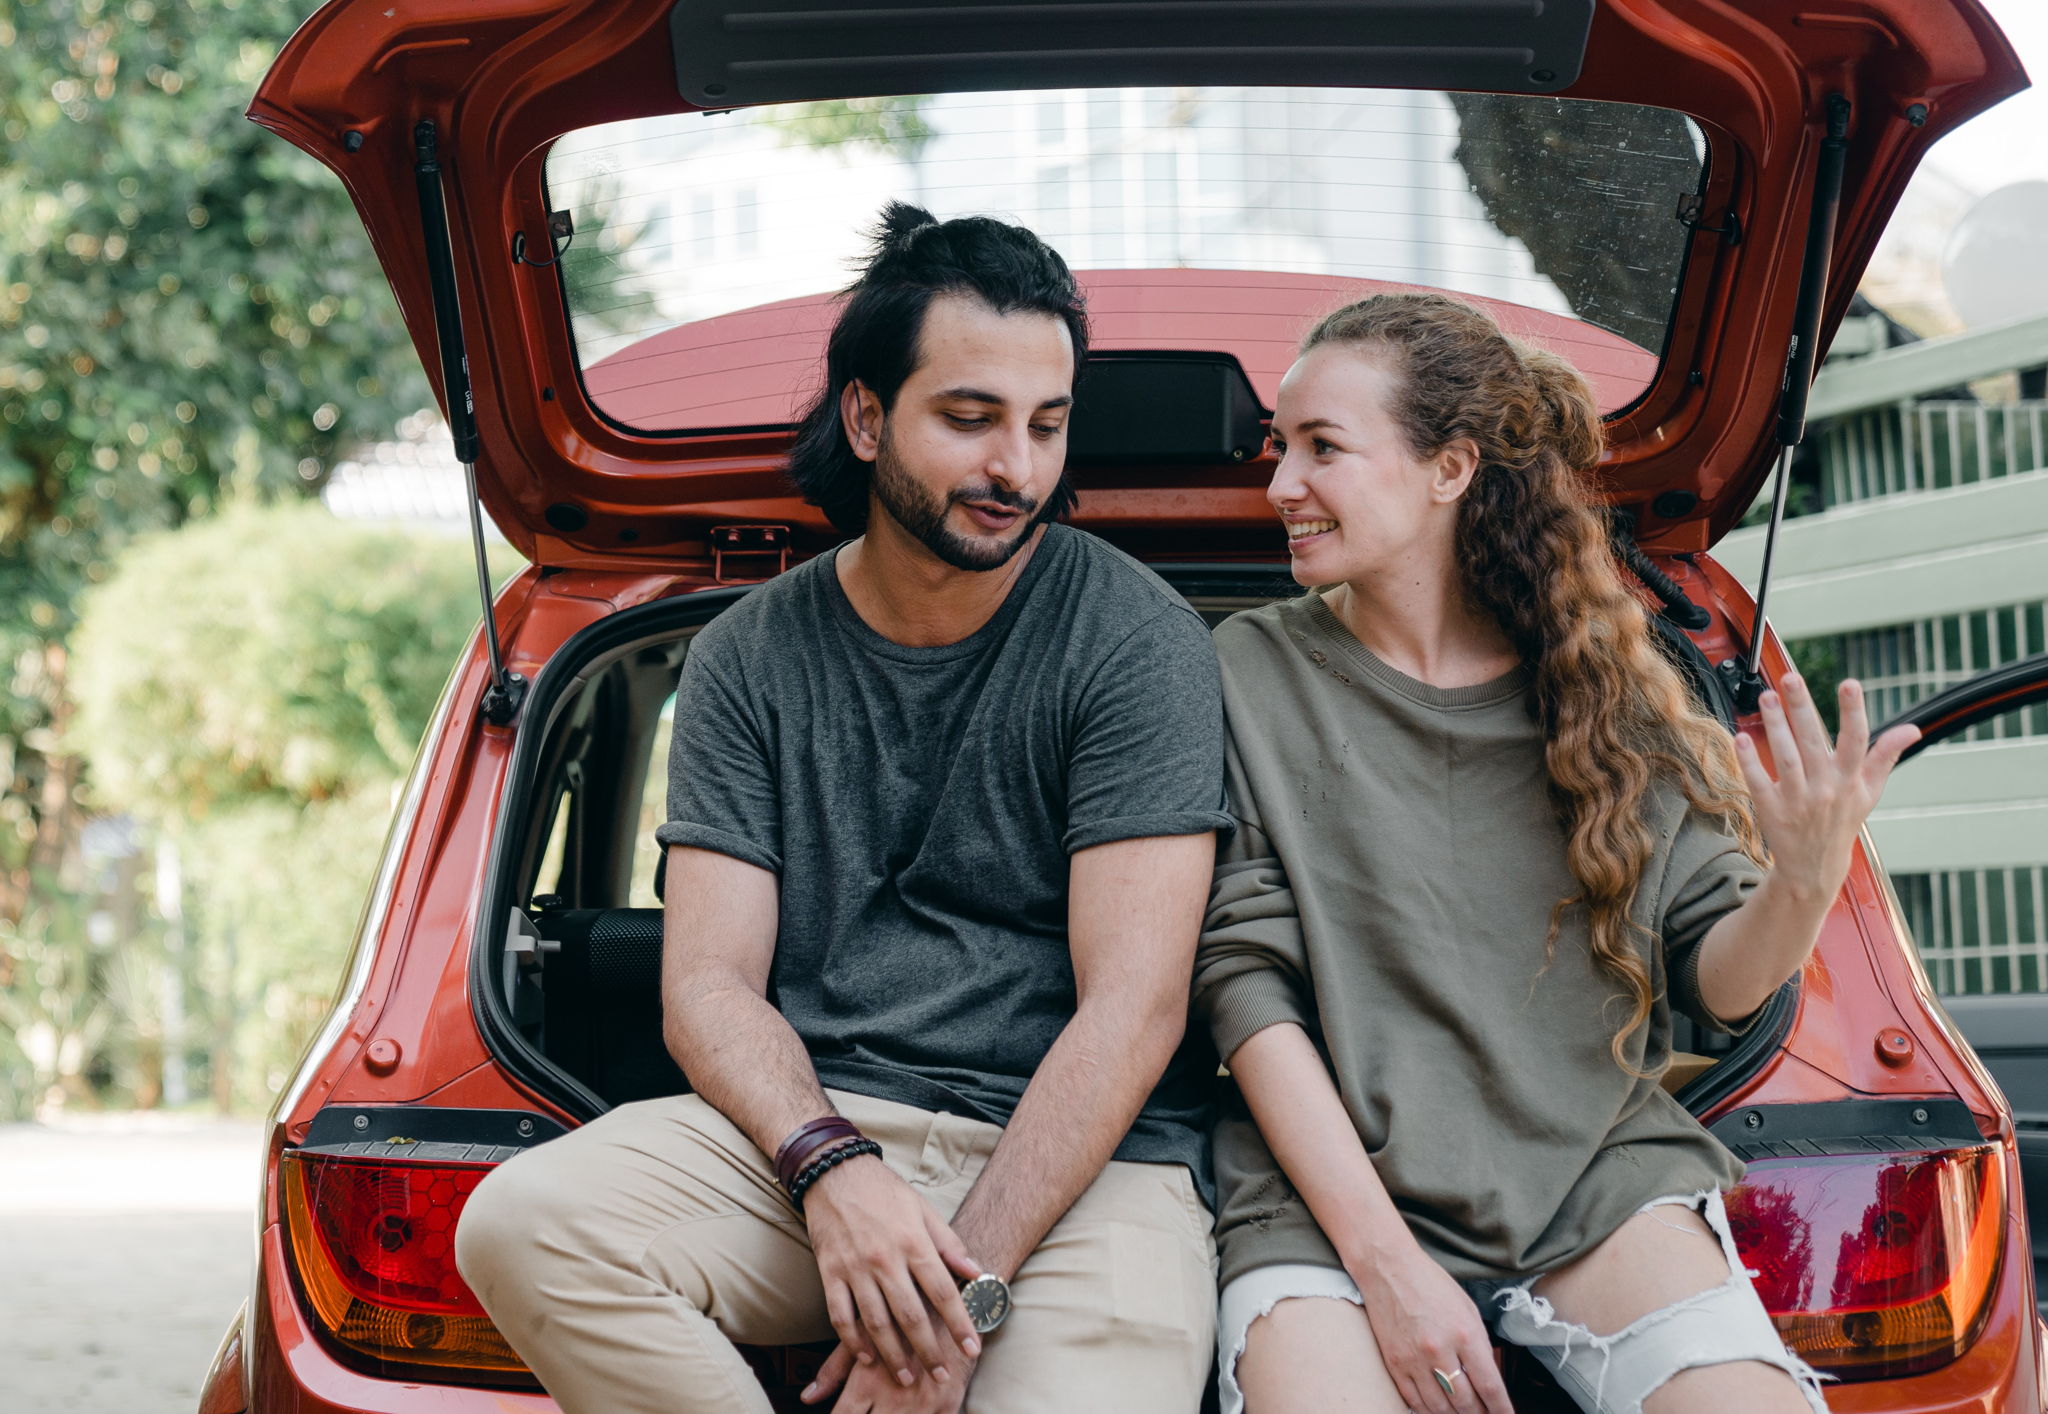 An attractive couple sitting together in the trunk of a car having an intimate conversation.